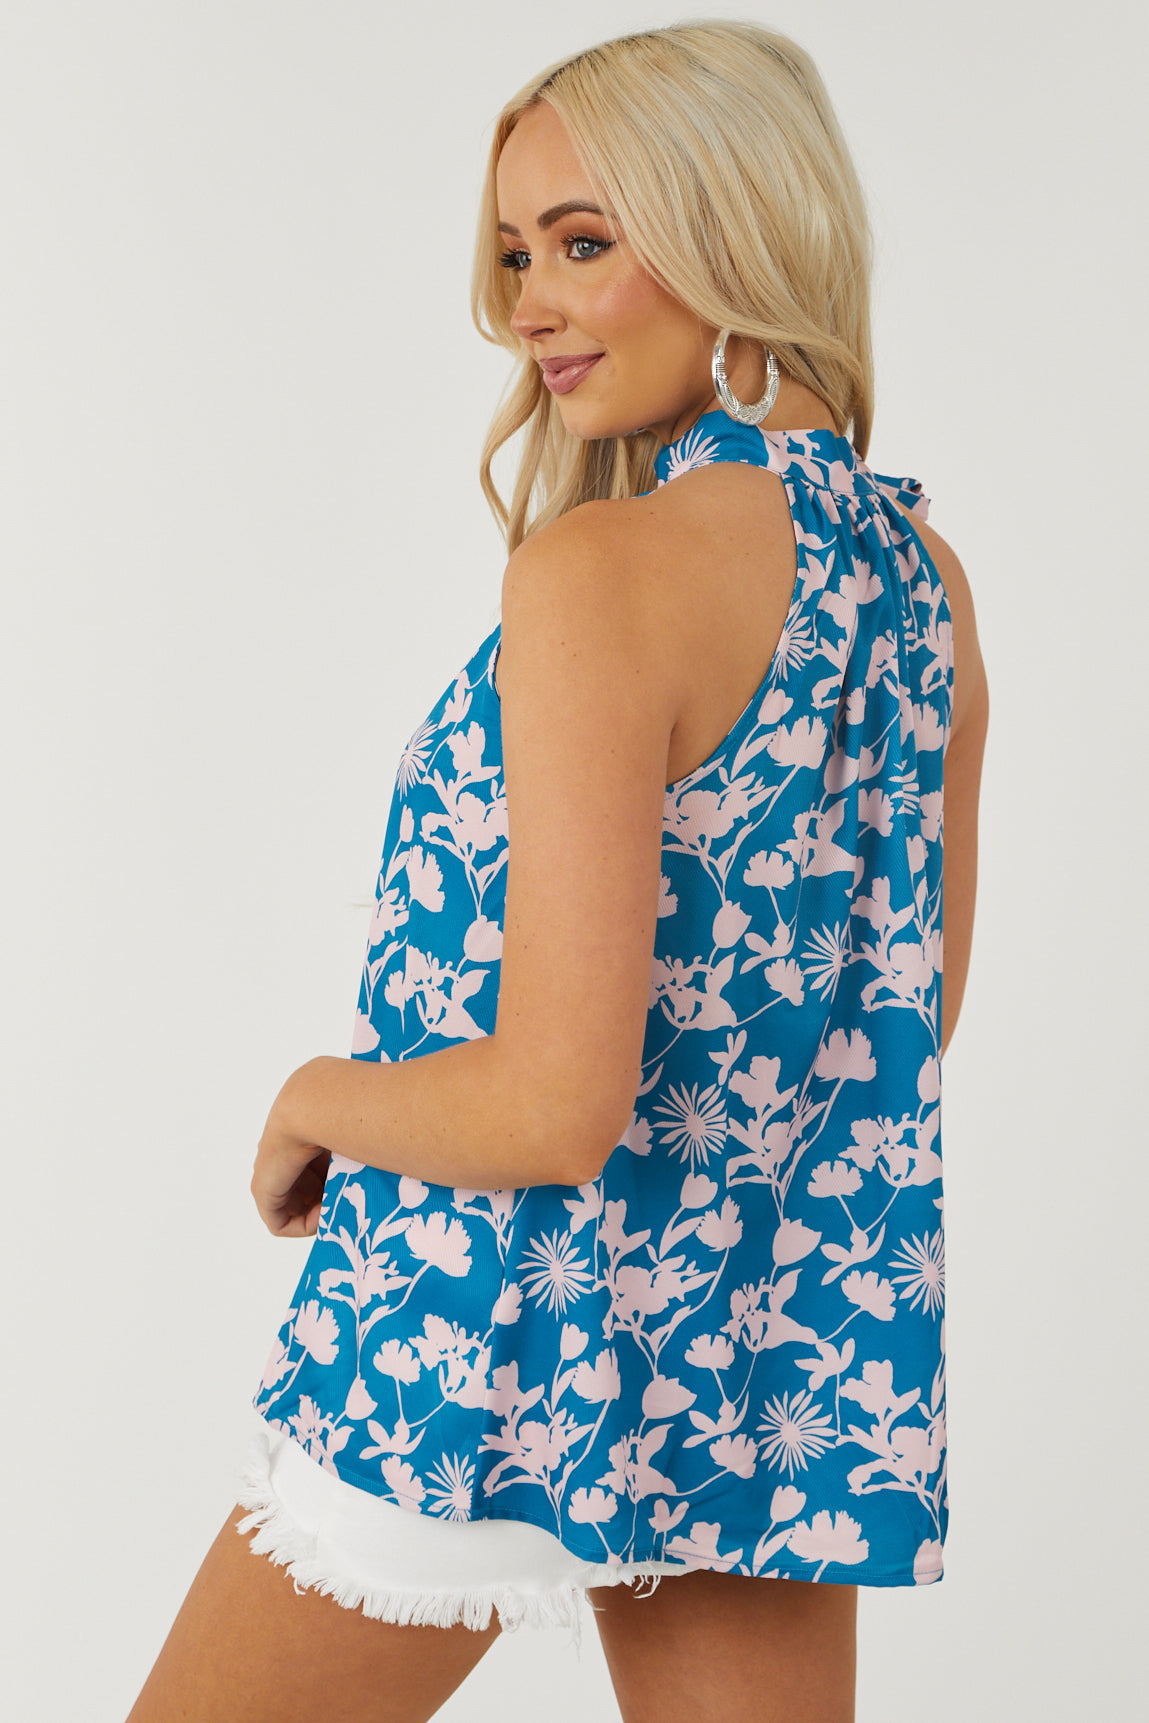 Sea Blue and Cherry Blossom Floral Halter Neck Top